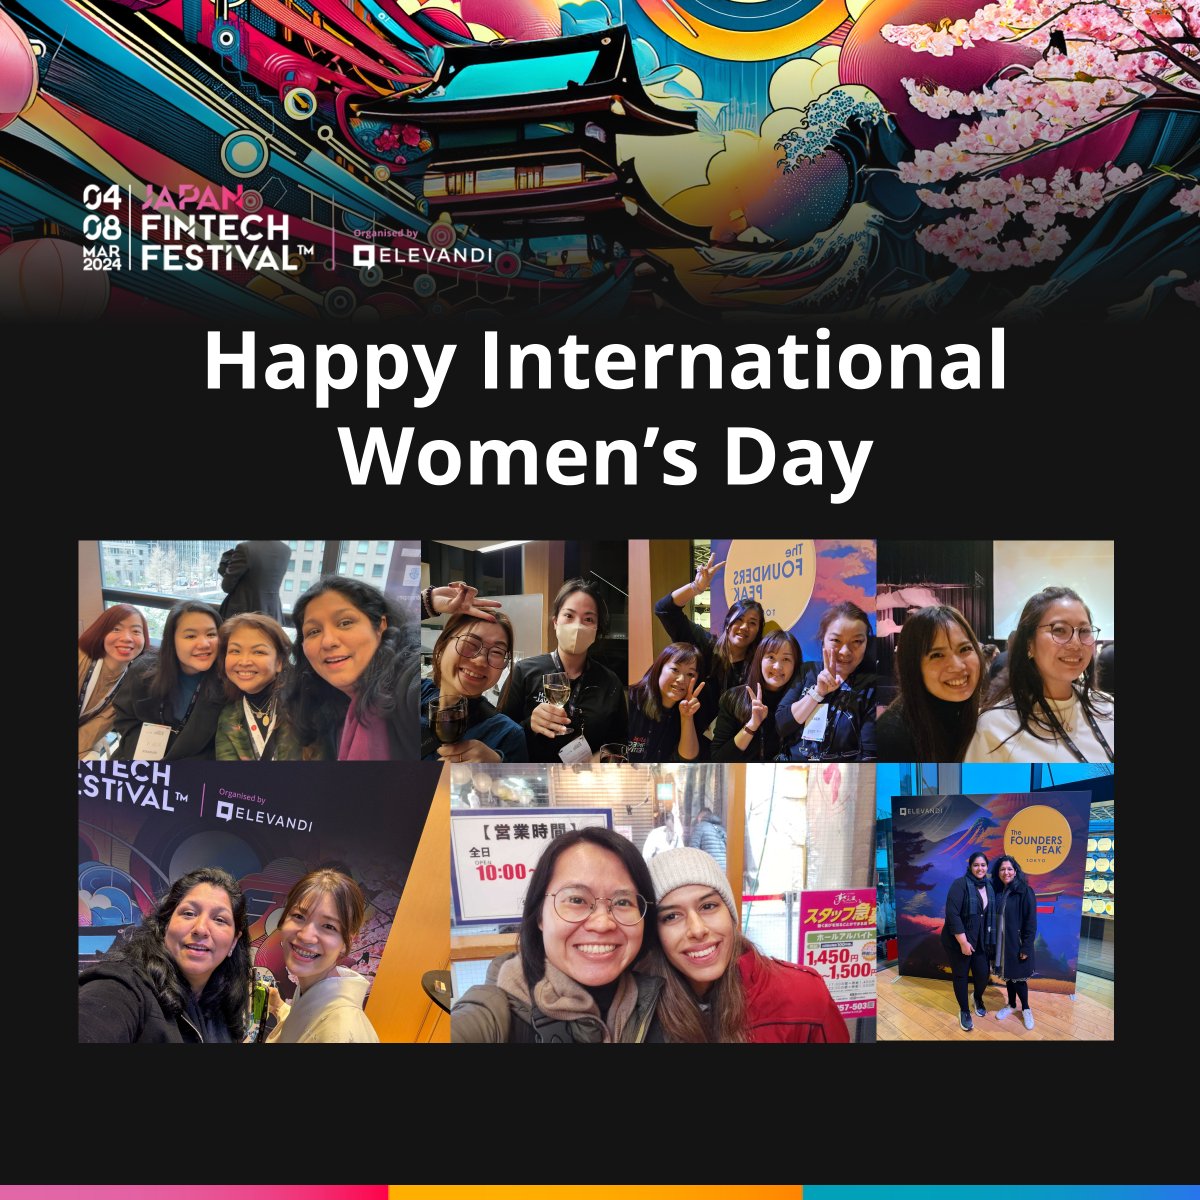 Happy IWD! At JFF, our goal is to inspire inclusion, mirroring the theme of this year's IWD. With that in mind, we'd like to express our gratitude to the amazing women from our speakers to our Elevandi and Elevandi Japan teams, who are the literal backbones of our success.